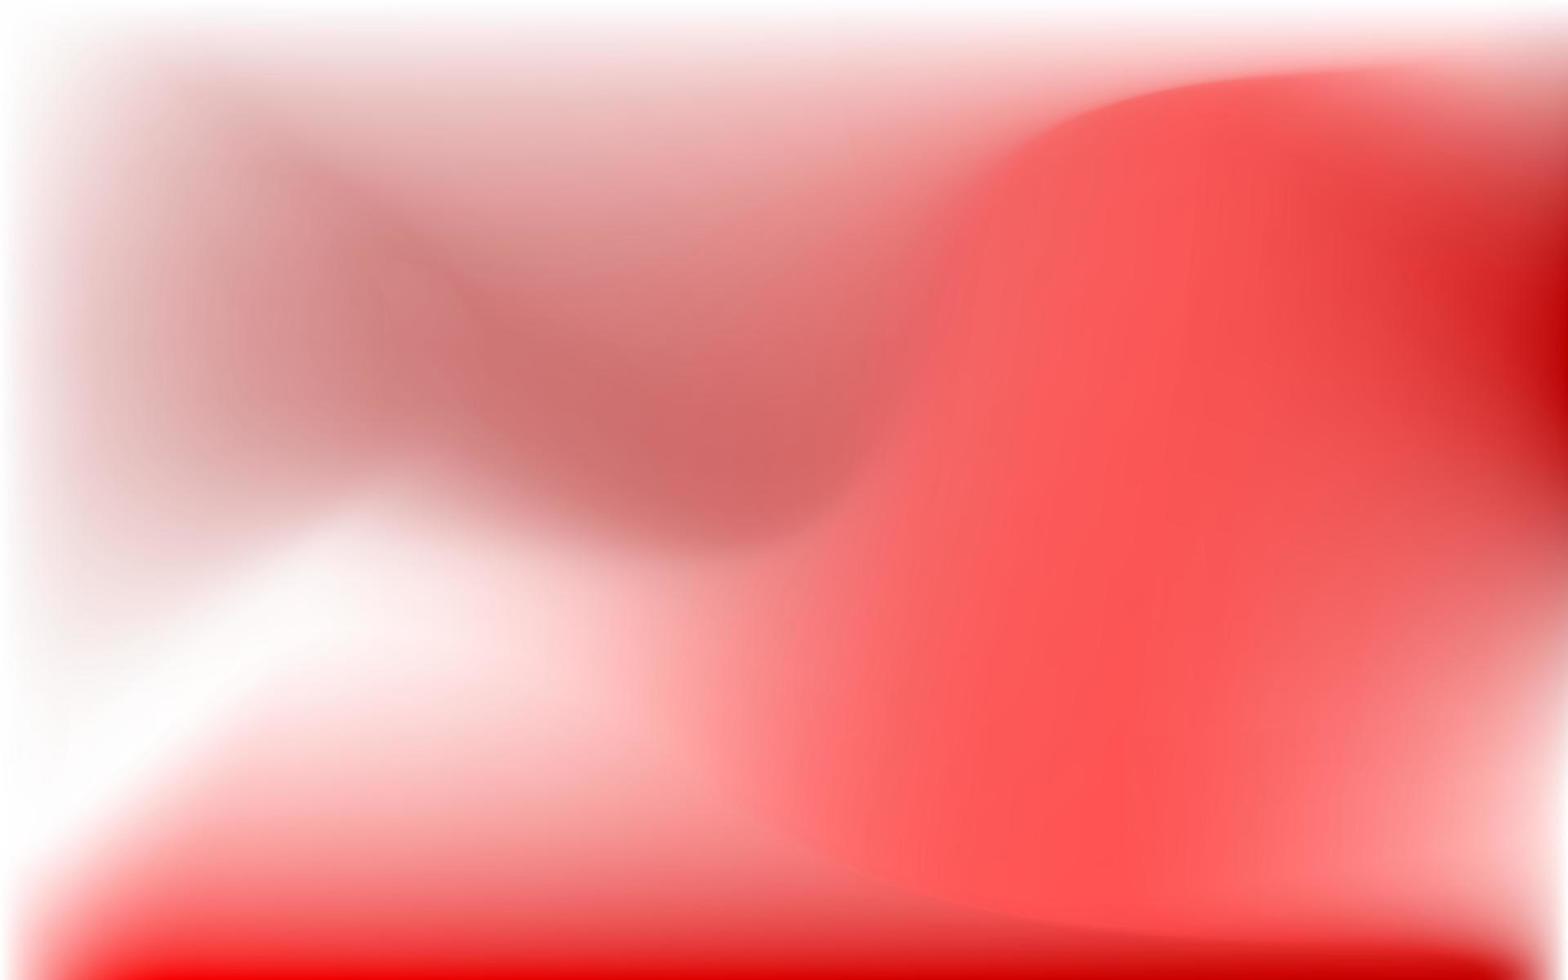 Abstract gradient red and white background vector